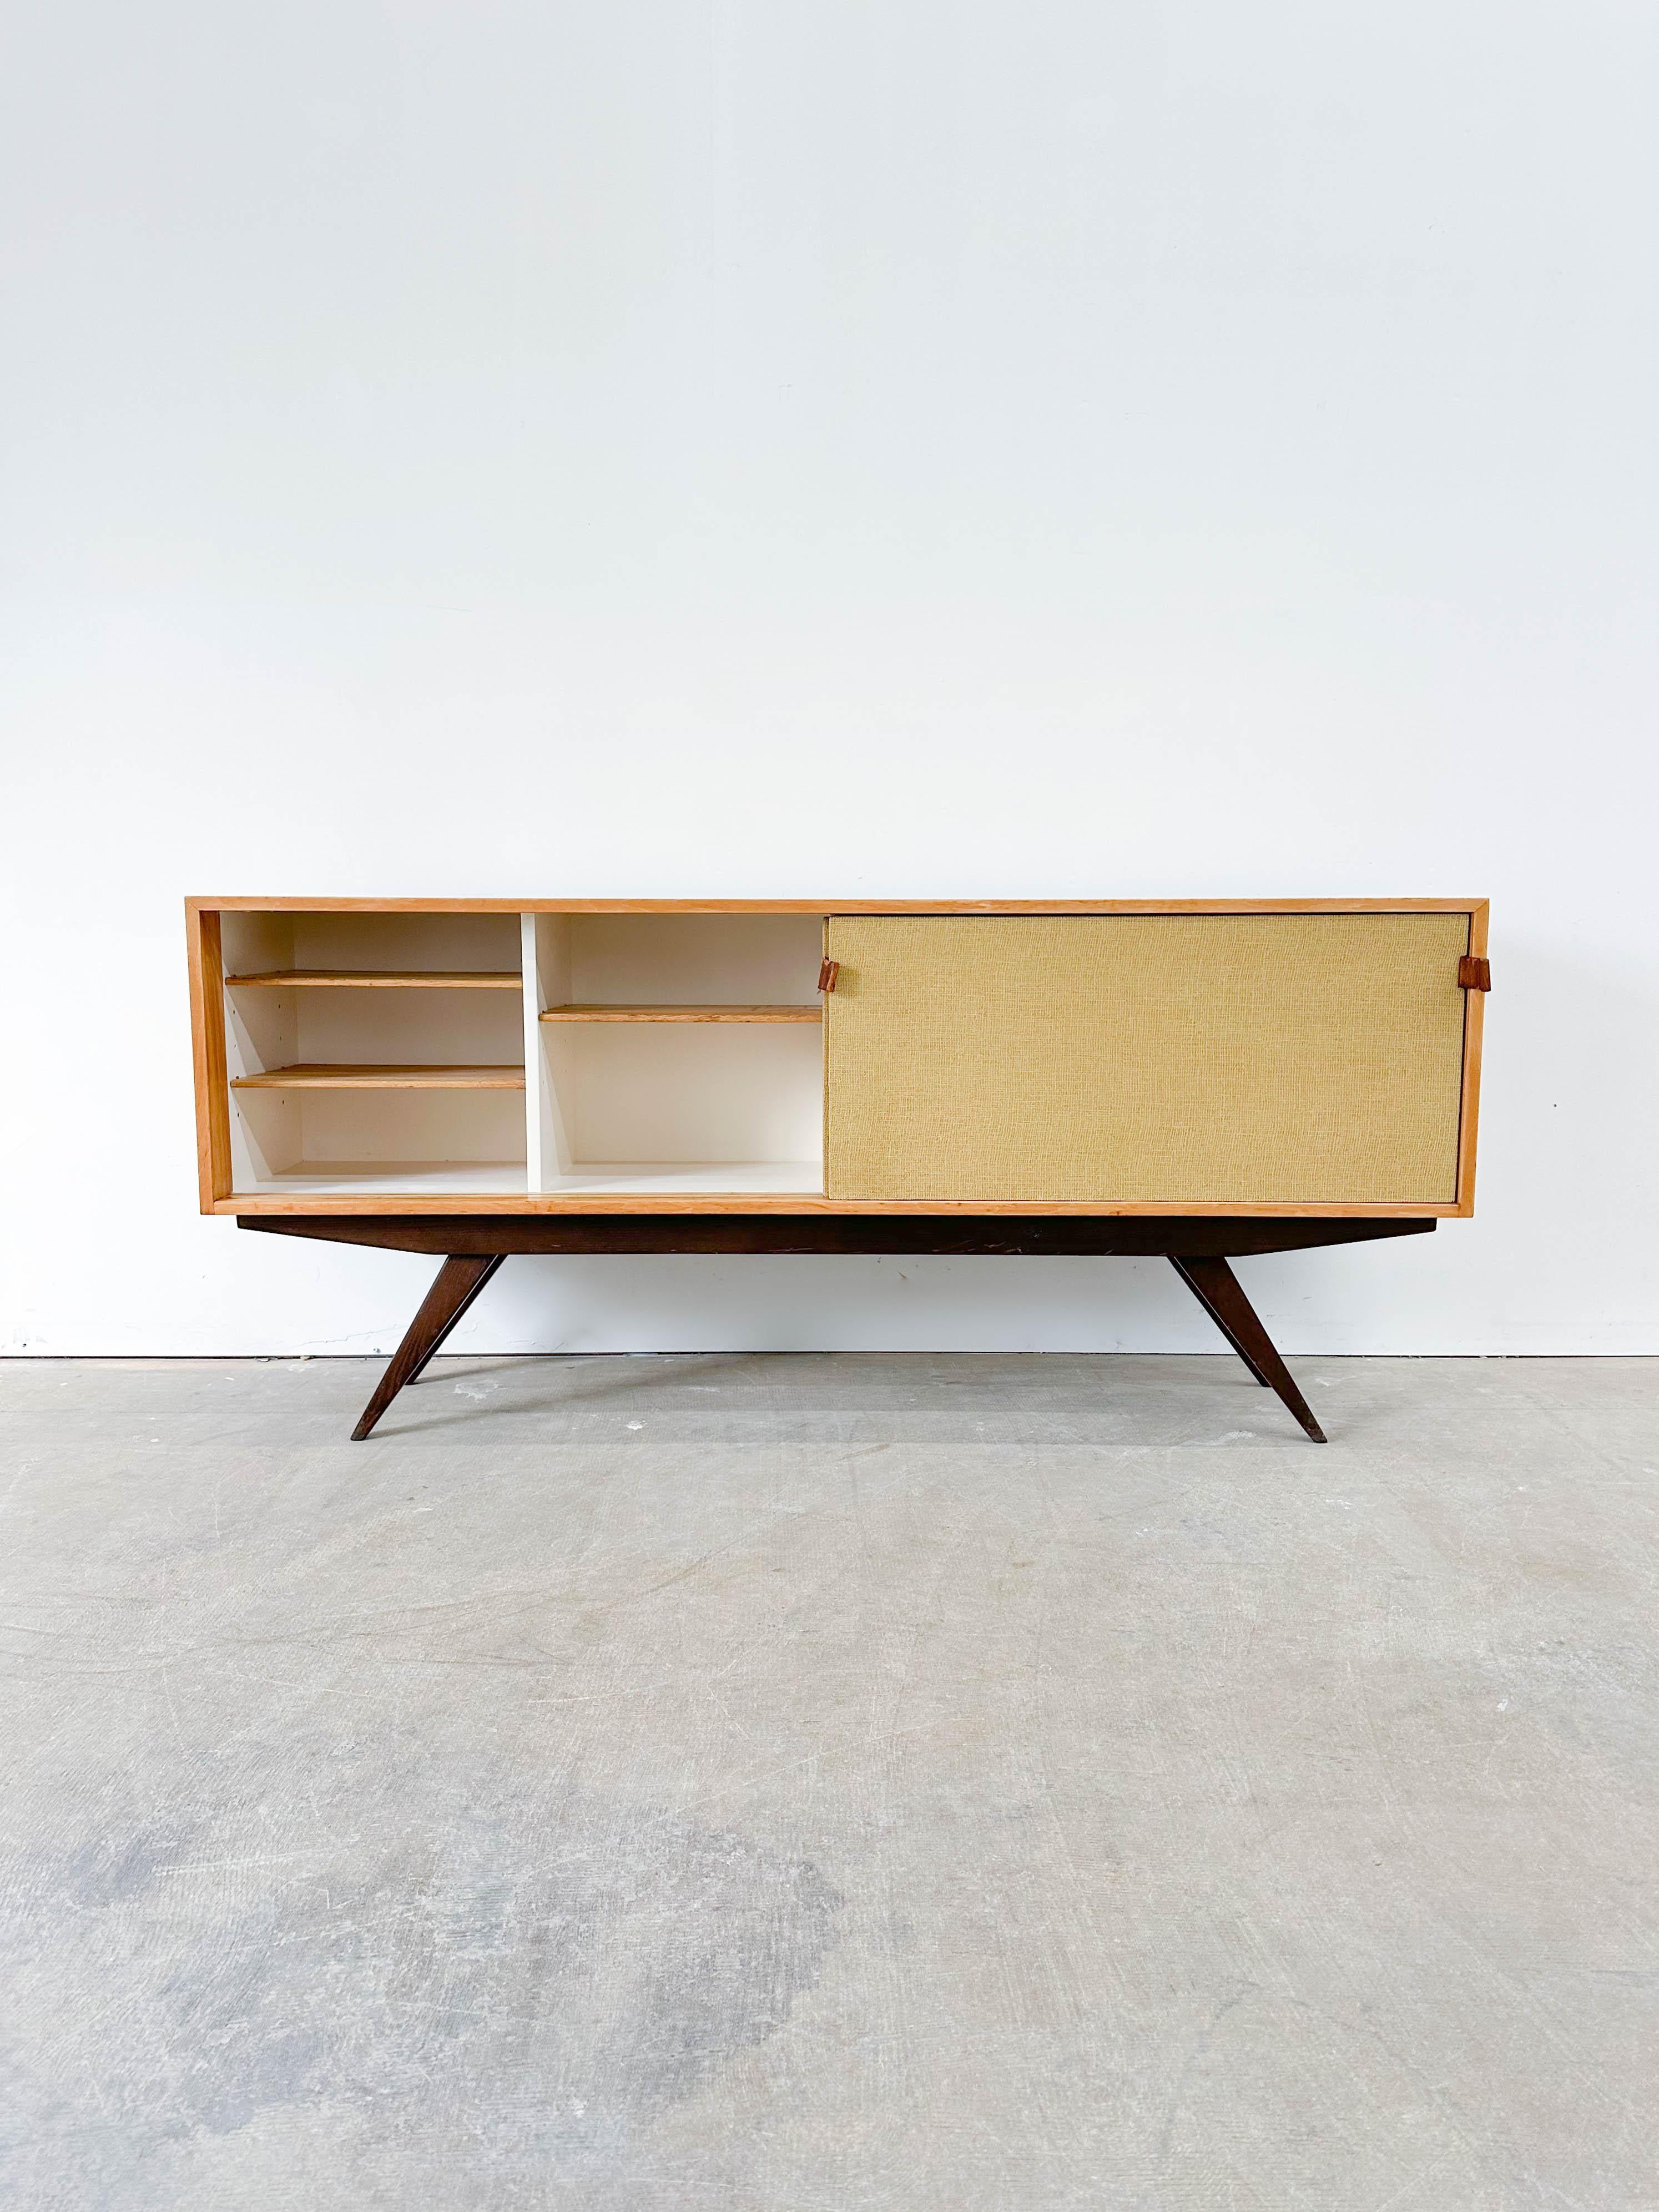 Early and rare credenza designed by Florence Knoll and produced by H.G. Knoll Associates from 1947-1949, predating the company's change to Knoll Associates. Featuring a birch plywood case, ebonized oak legs, white painted interior, three adjustable